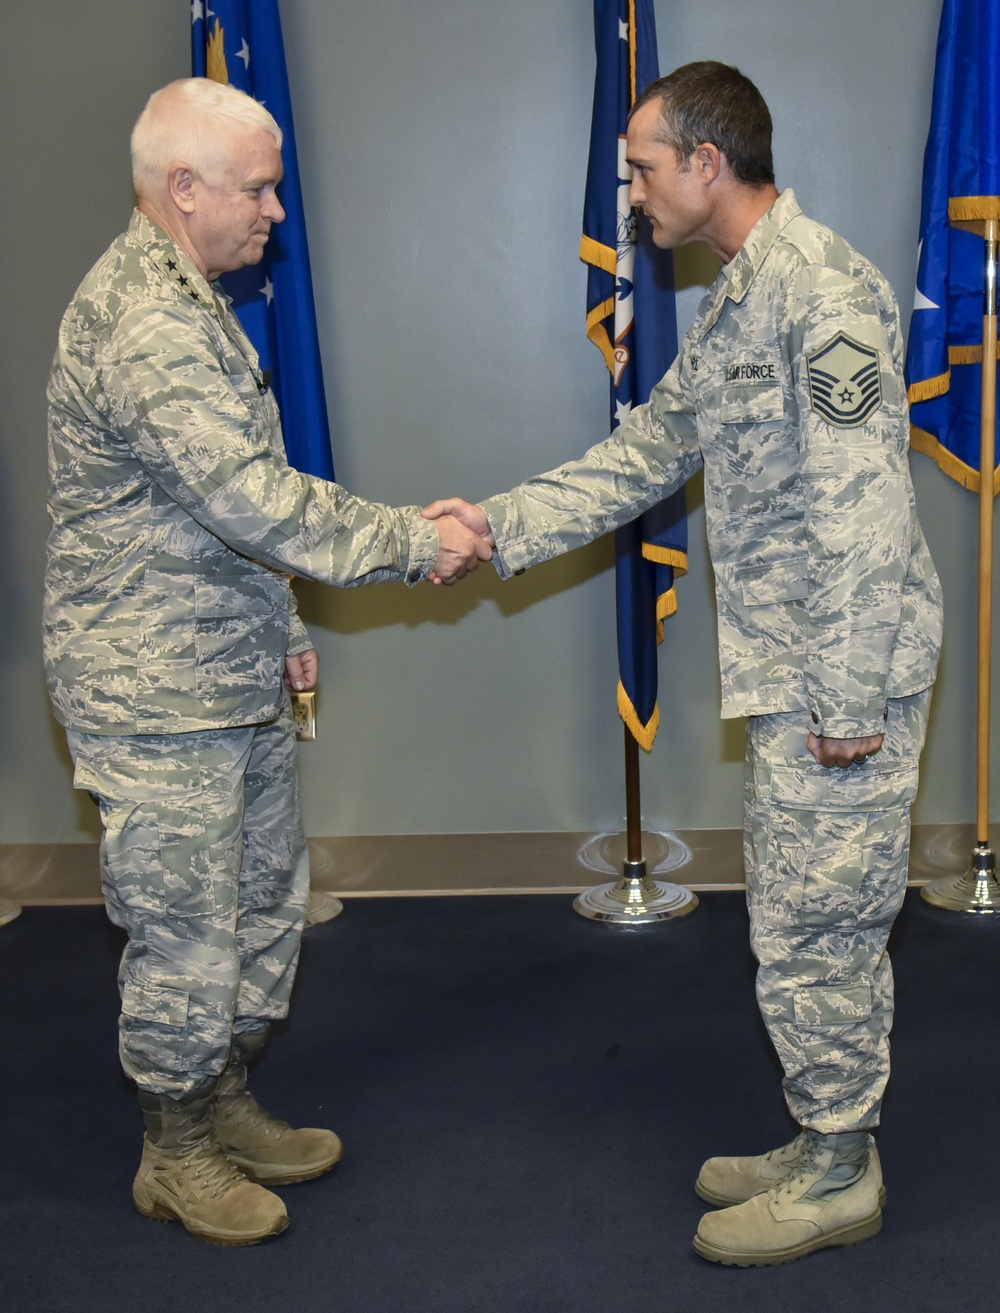 Lt. Gen. Rice Presents Coin during Visit To 117 ARW